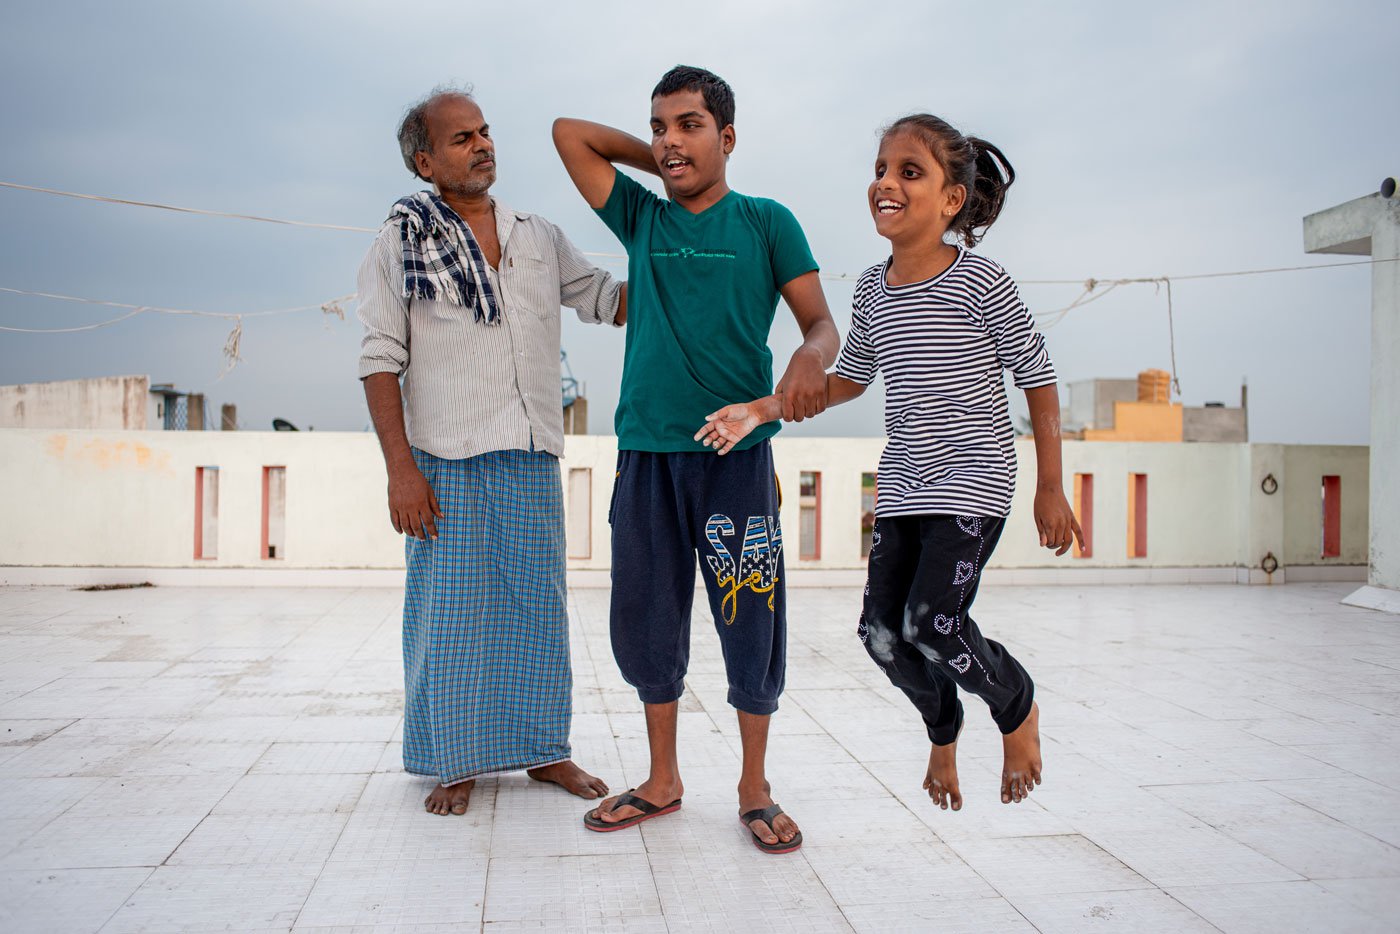 Balaraman (left) takes his eldest grandson Meshak (centre) to the terrace every evening for a walk. Meshak needs constant monitoring because he suffers frequently from epileptic seizures. Sometimes his sister Lebana (right) joins them